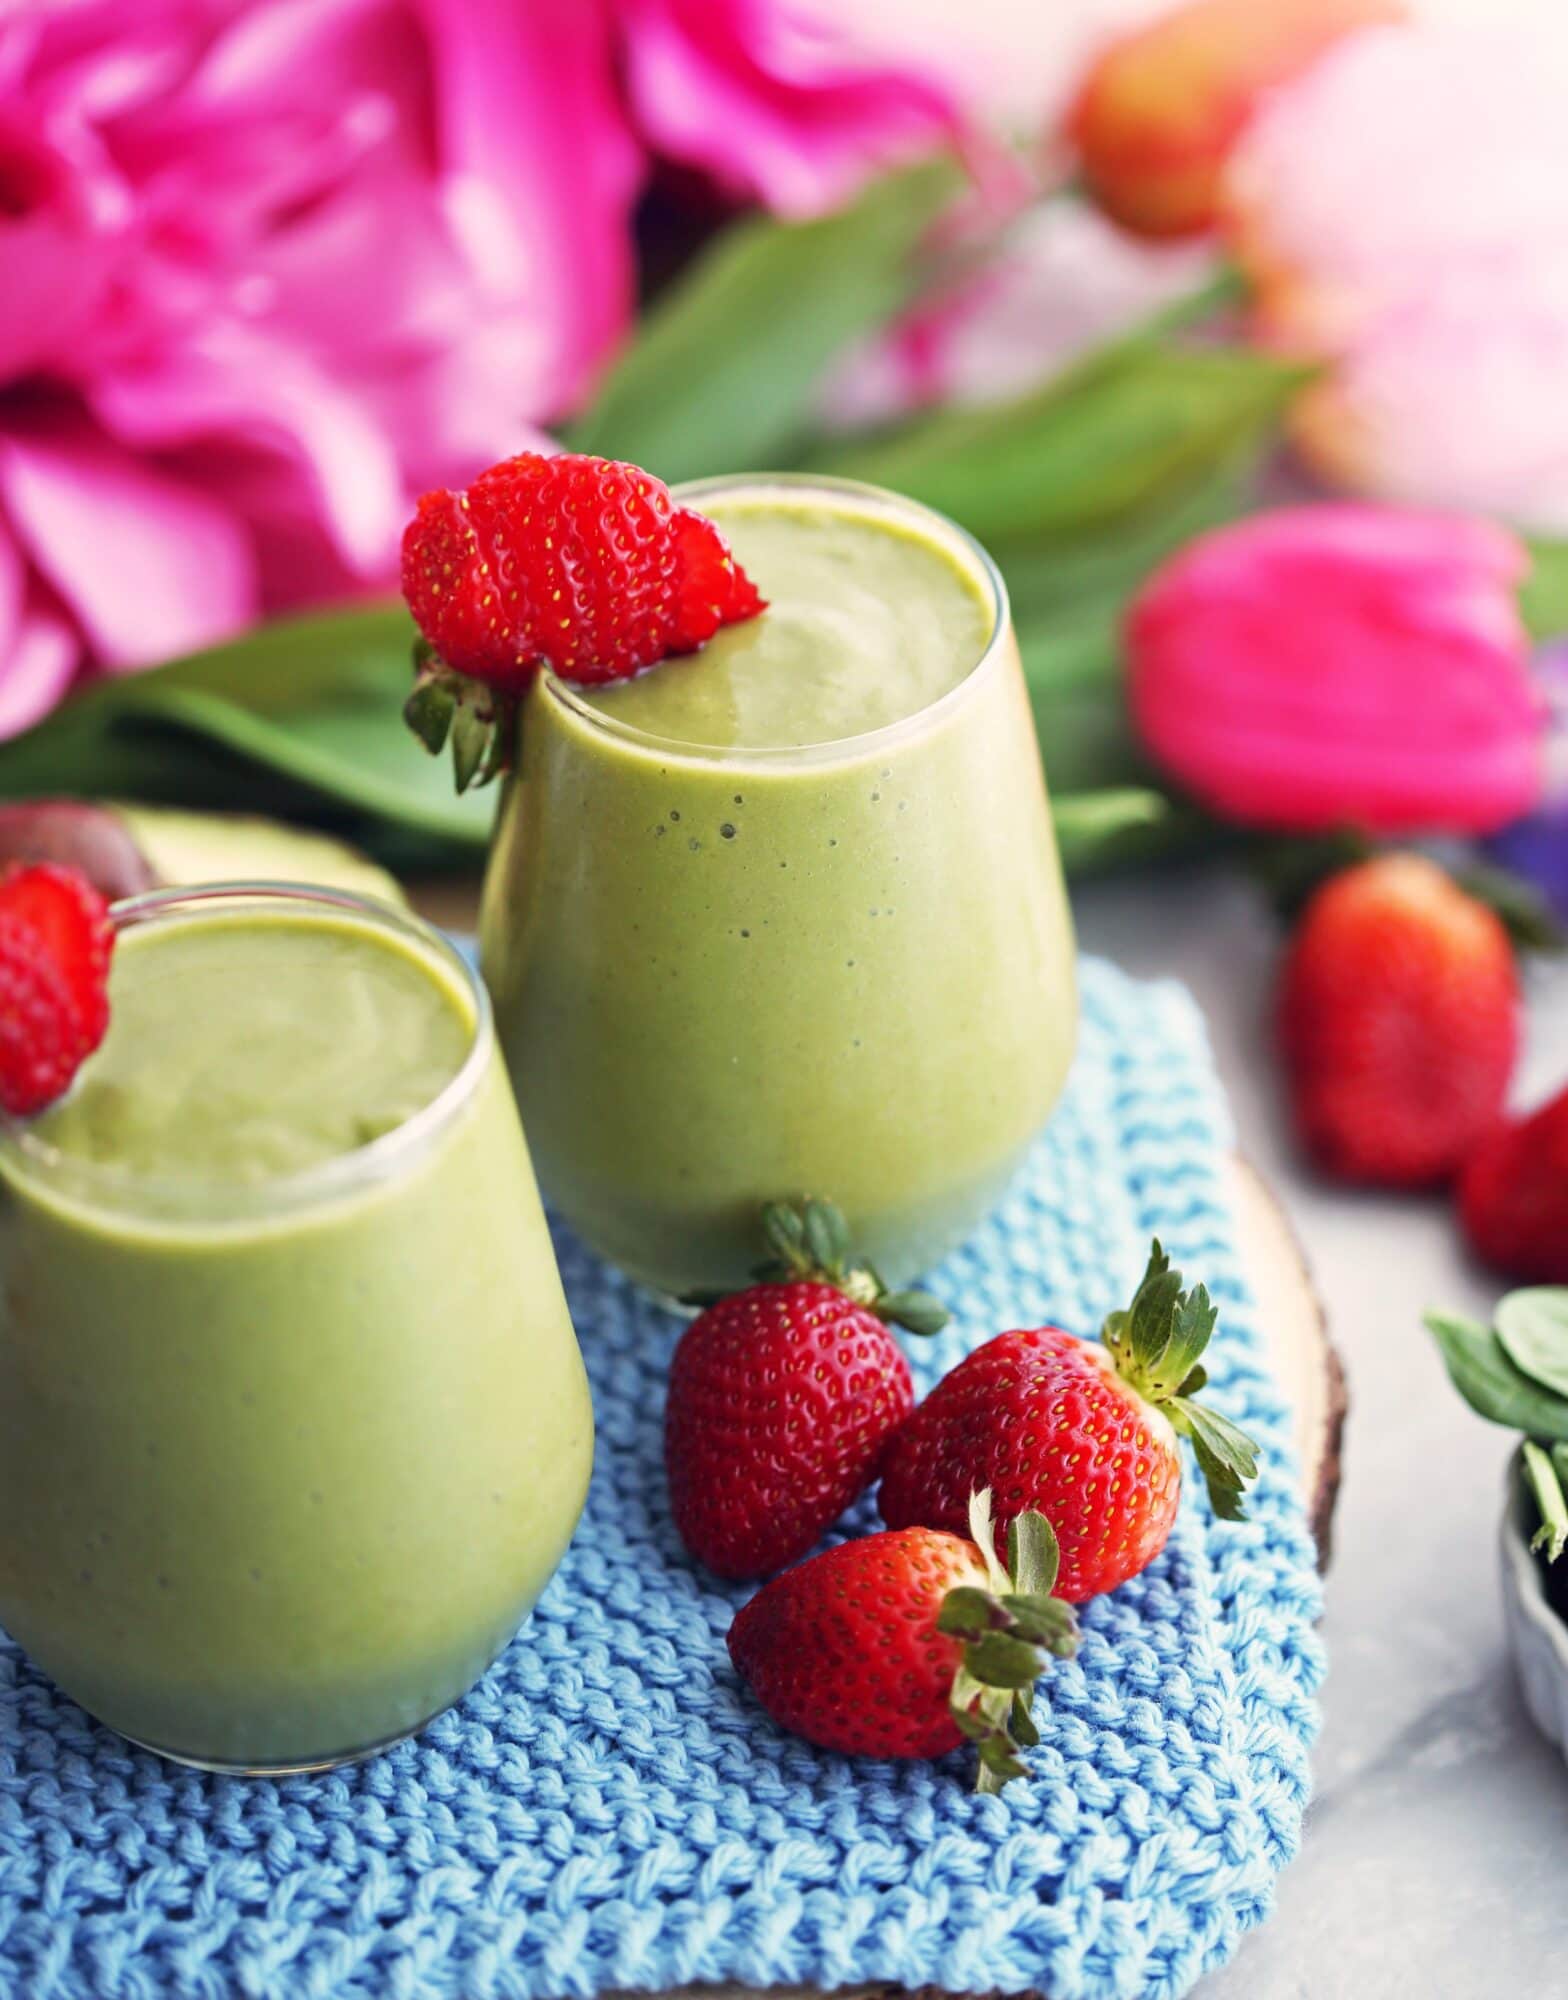 Strawberry Avocado Green Smoothie - Yay! For Food